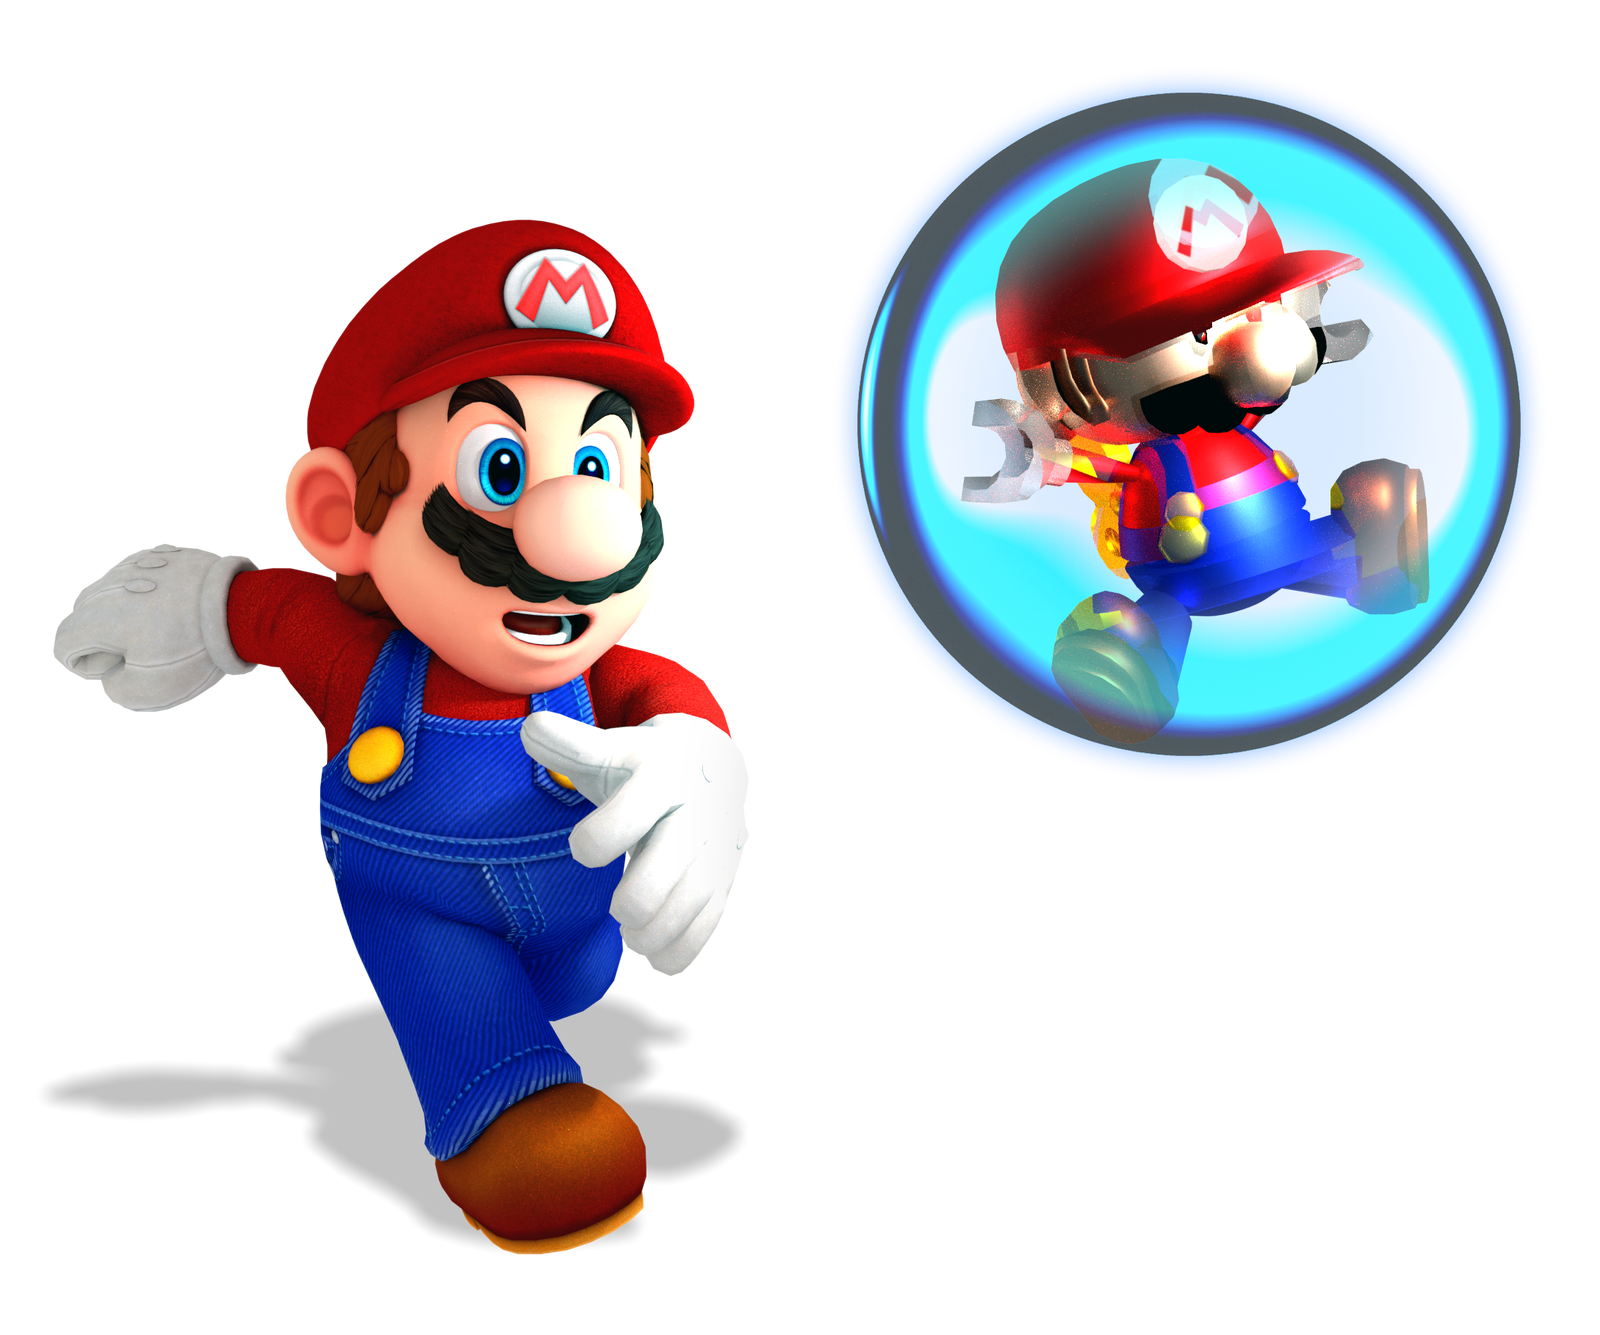 mini_mario_rescue_by_fawfulthegreat64-dc6znjs.png